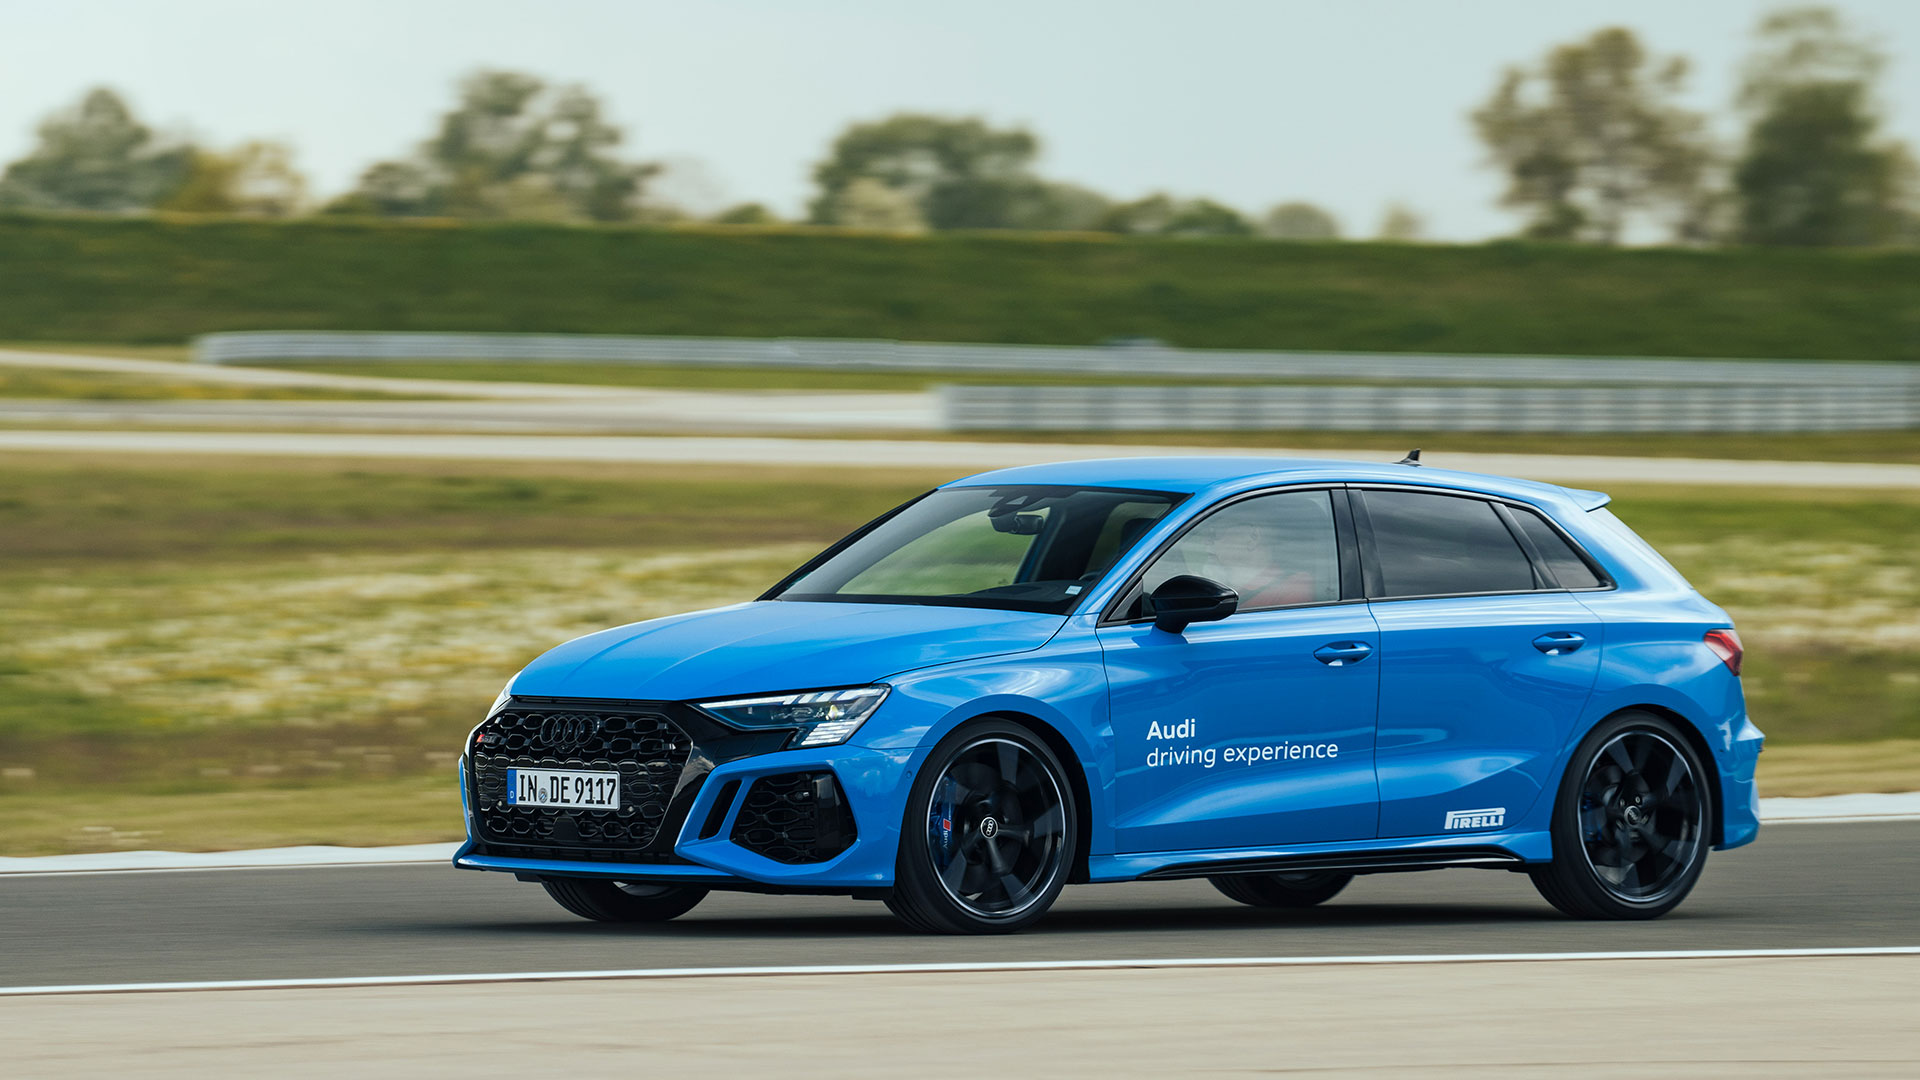 A blue Audi RS 3 Sportback in full swing on a race track